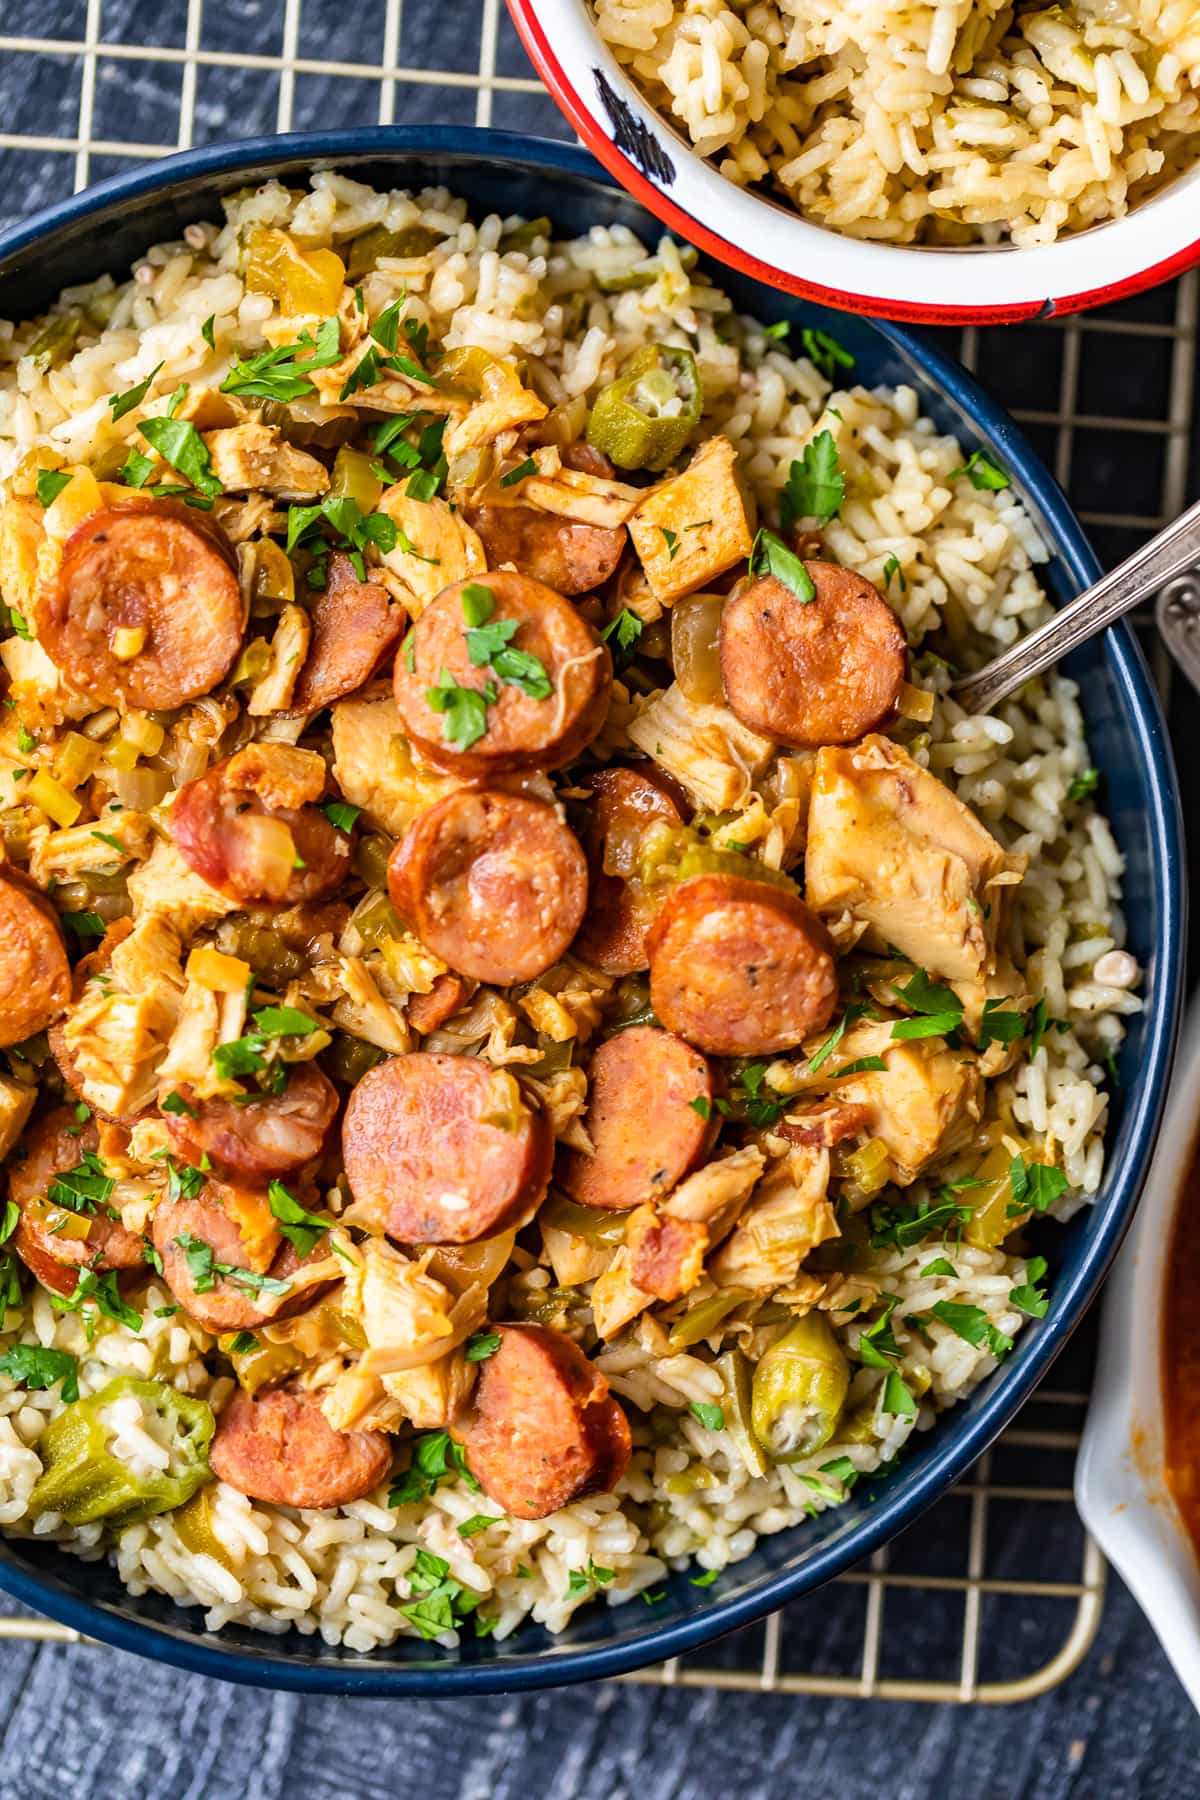 chicken gumbo with sausage, served over rice pilaf